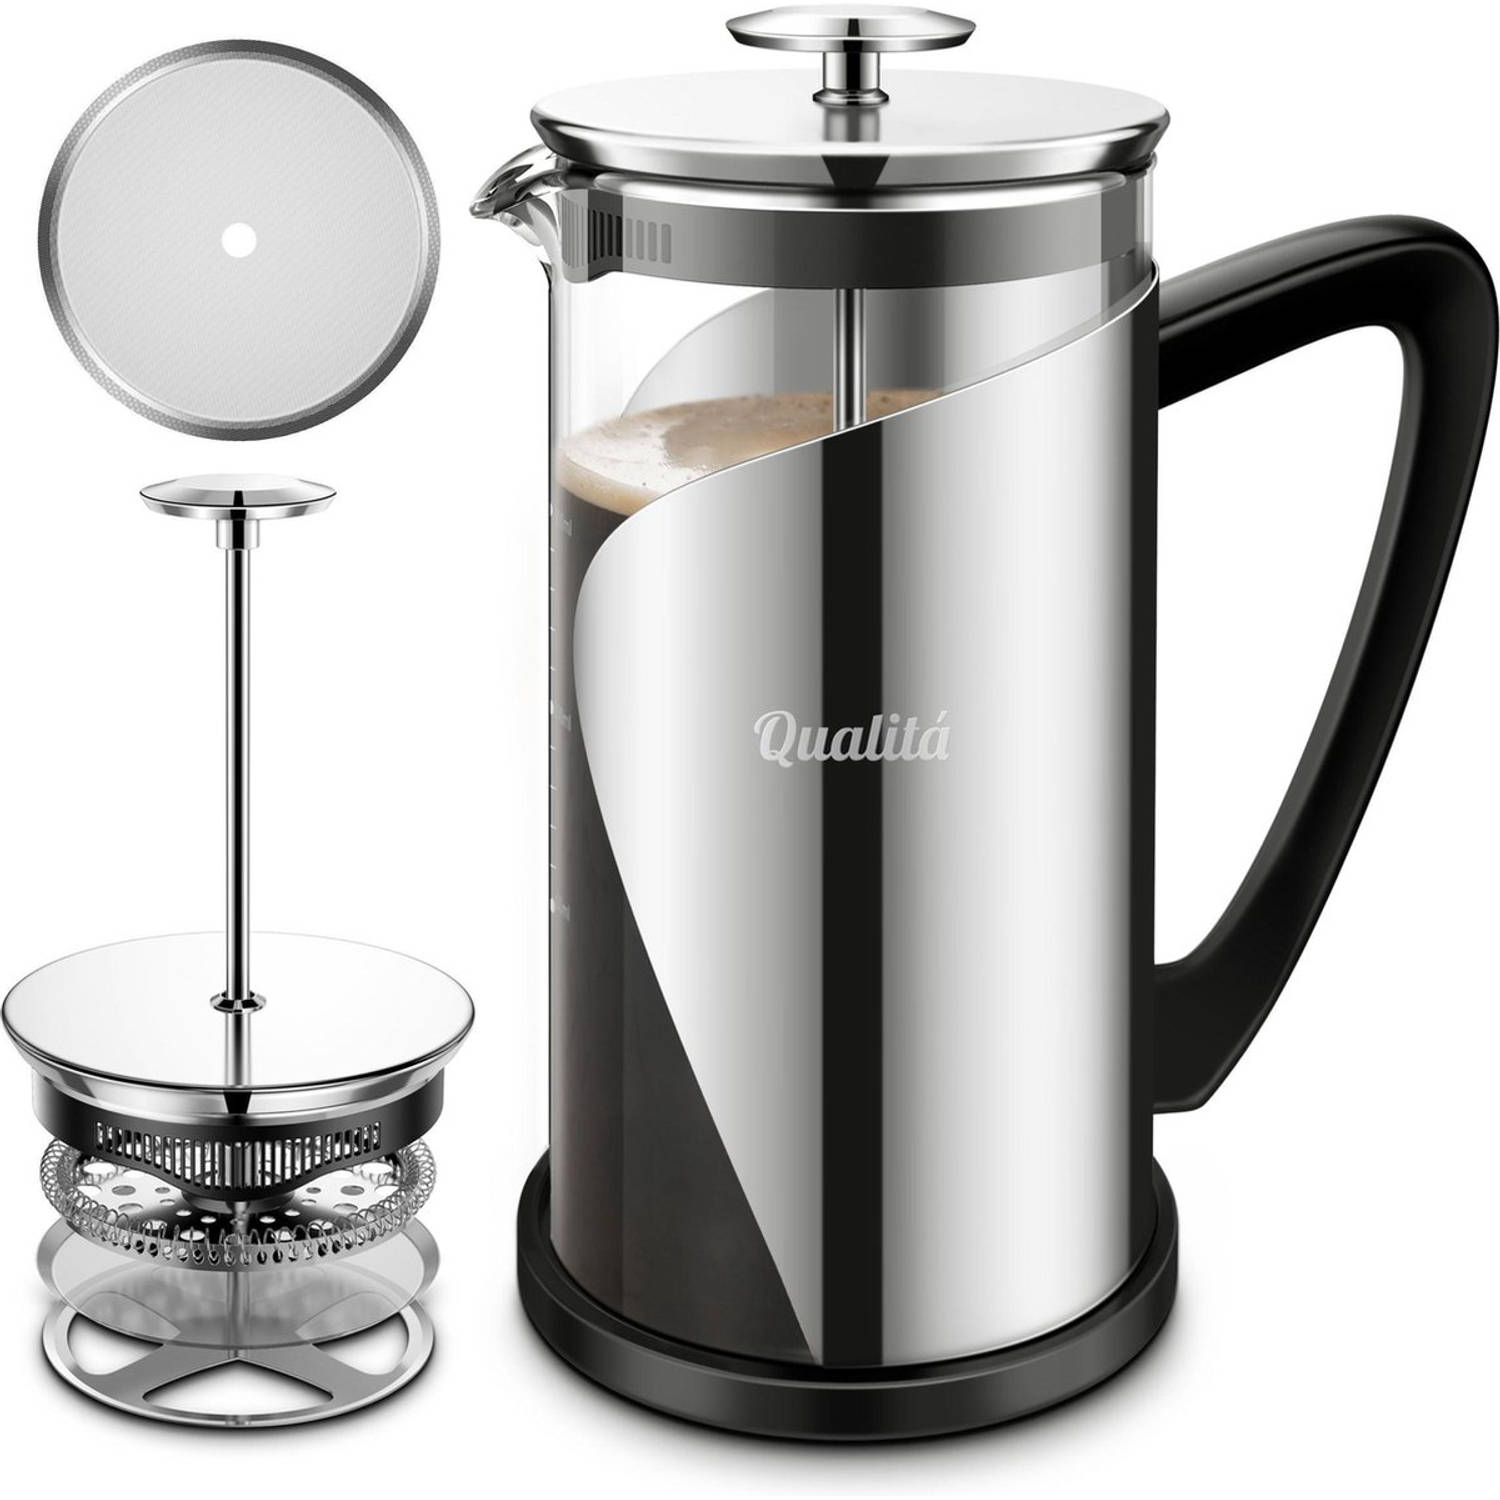 Qualitá French Press - Cafetiere - Koffiemaker - Franse Pers